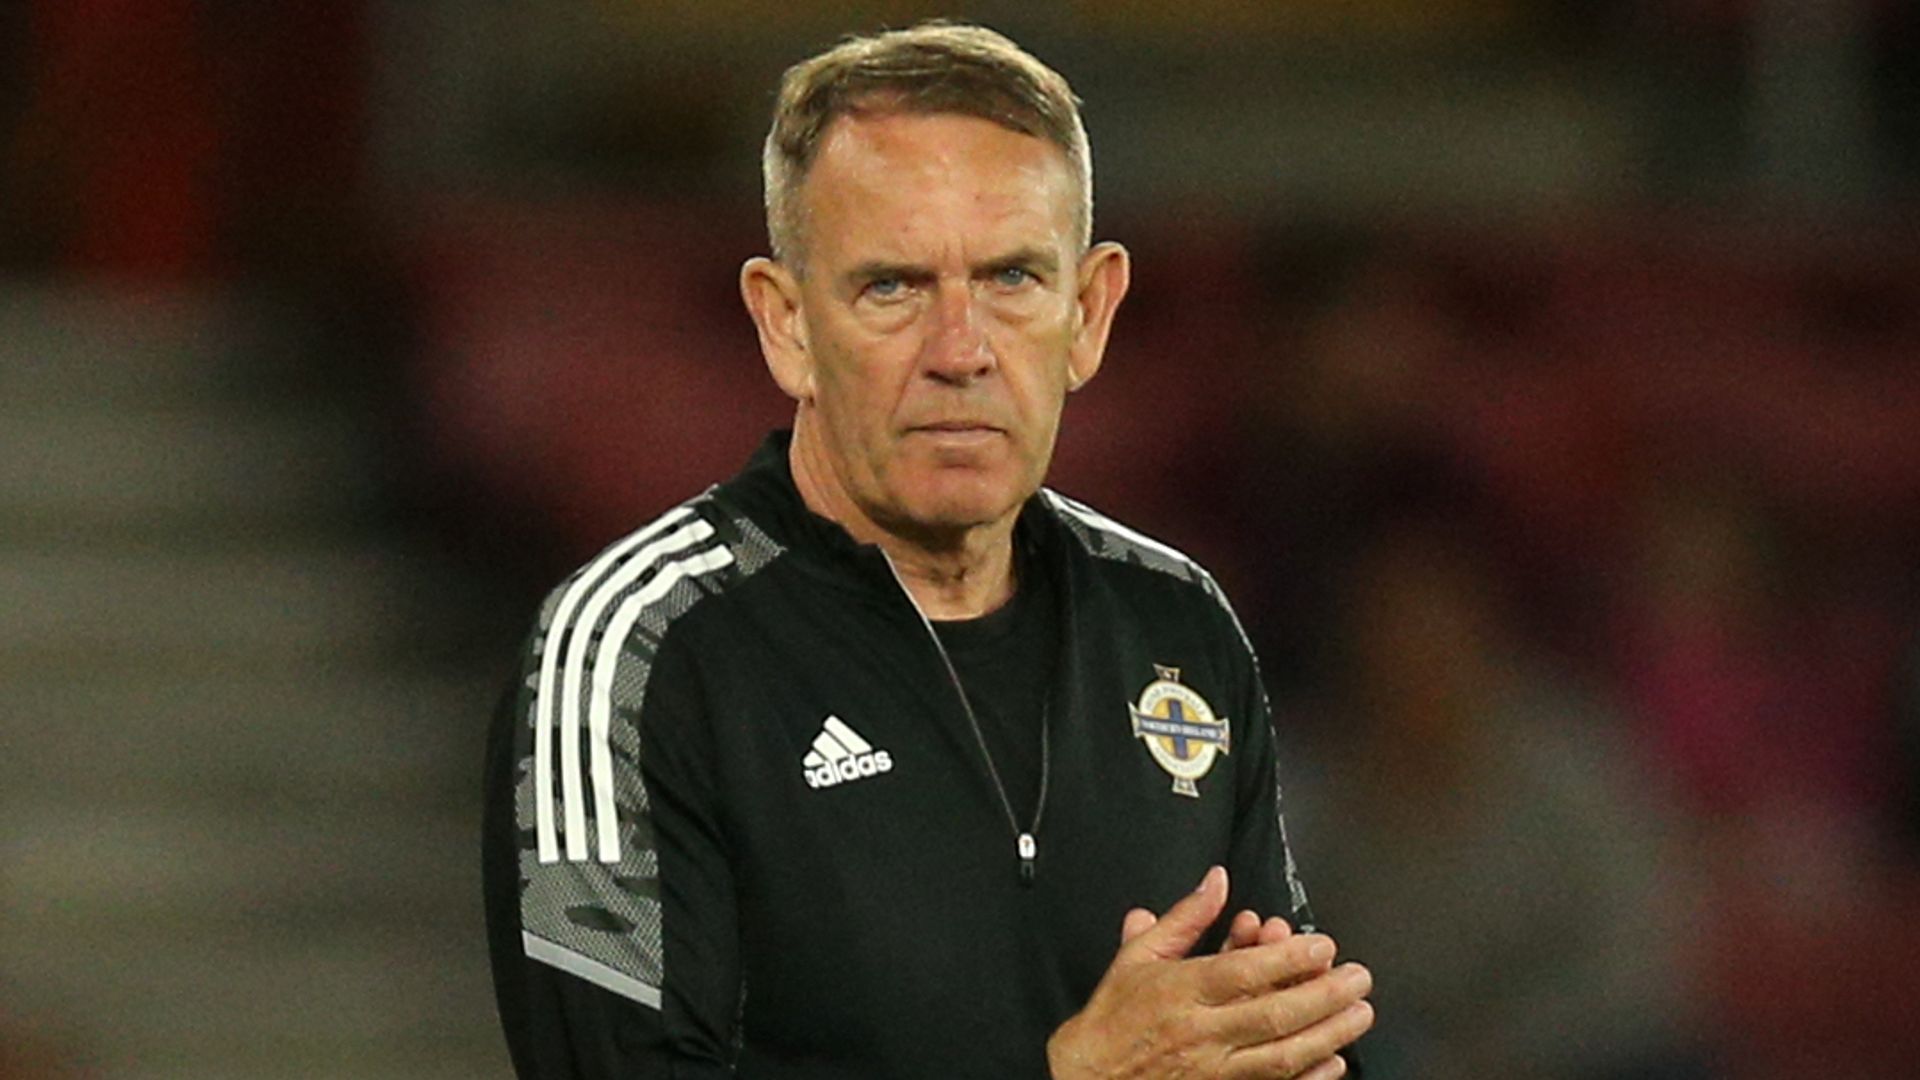 Shiels leaves role as Northern Ireland Women's manager